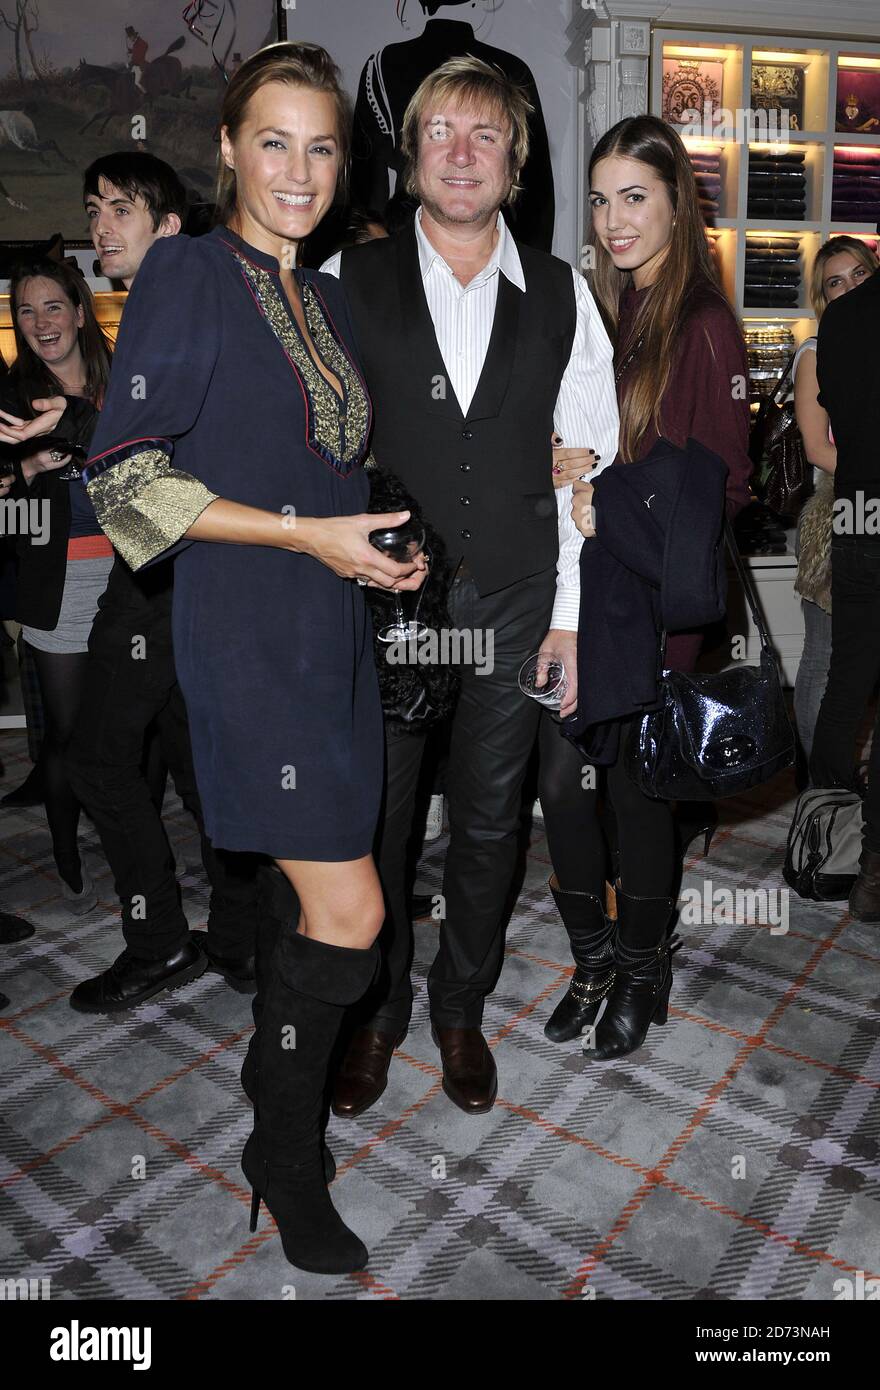 (l-r) Yasmin, Amber and Simon Le Bon attending the launch party for Juicy Couture's flagship store in central London. Stock Photo